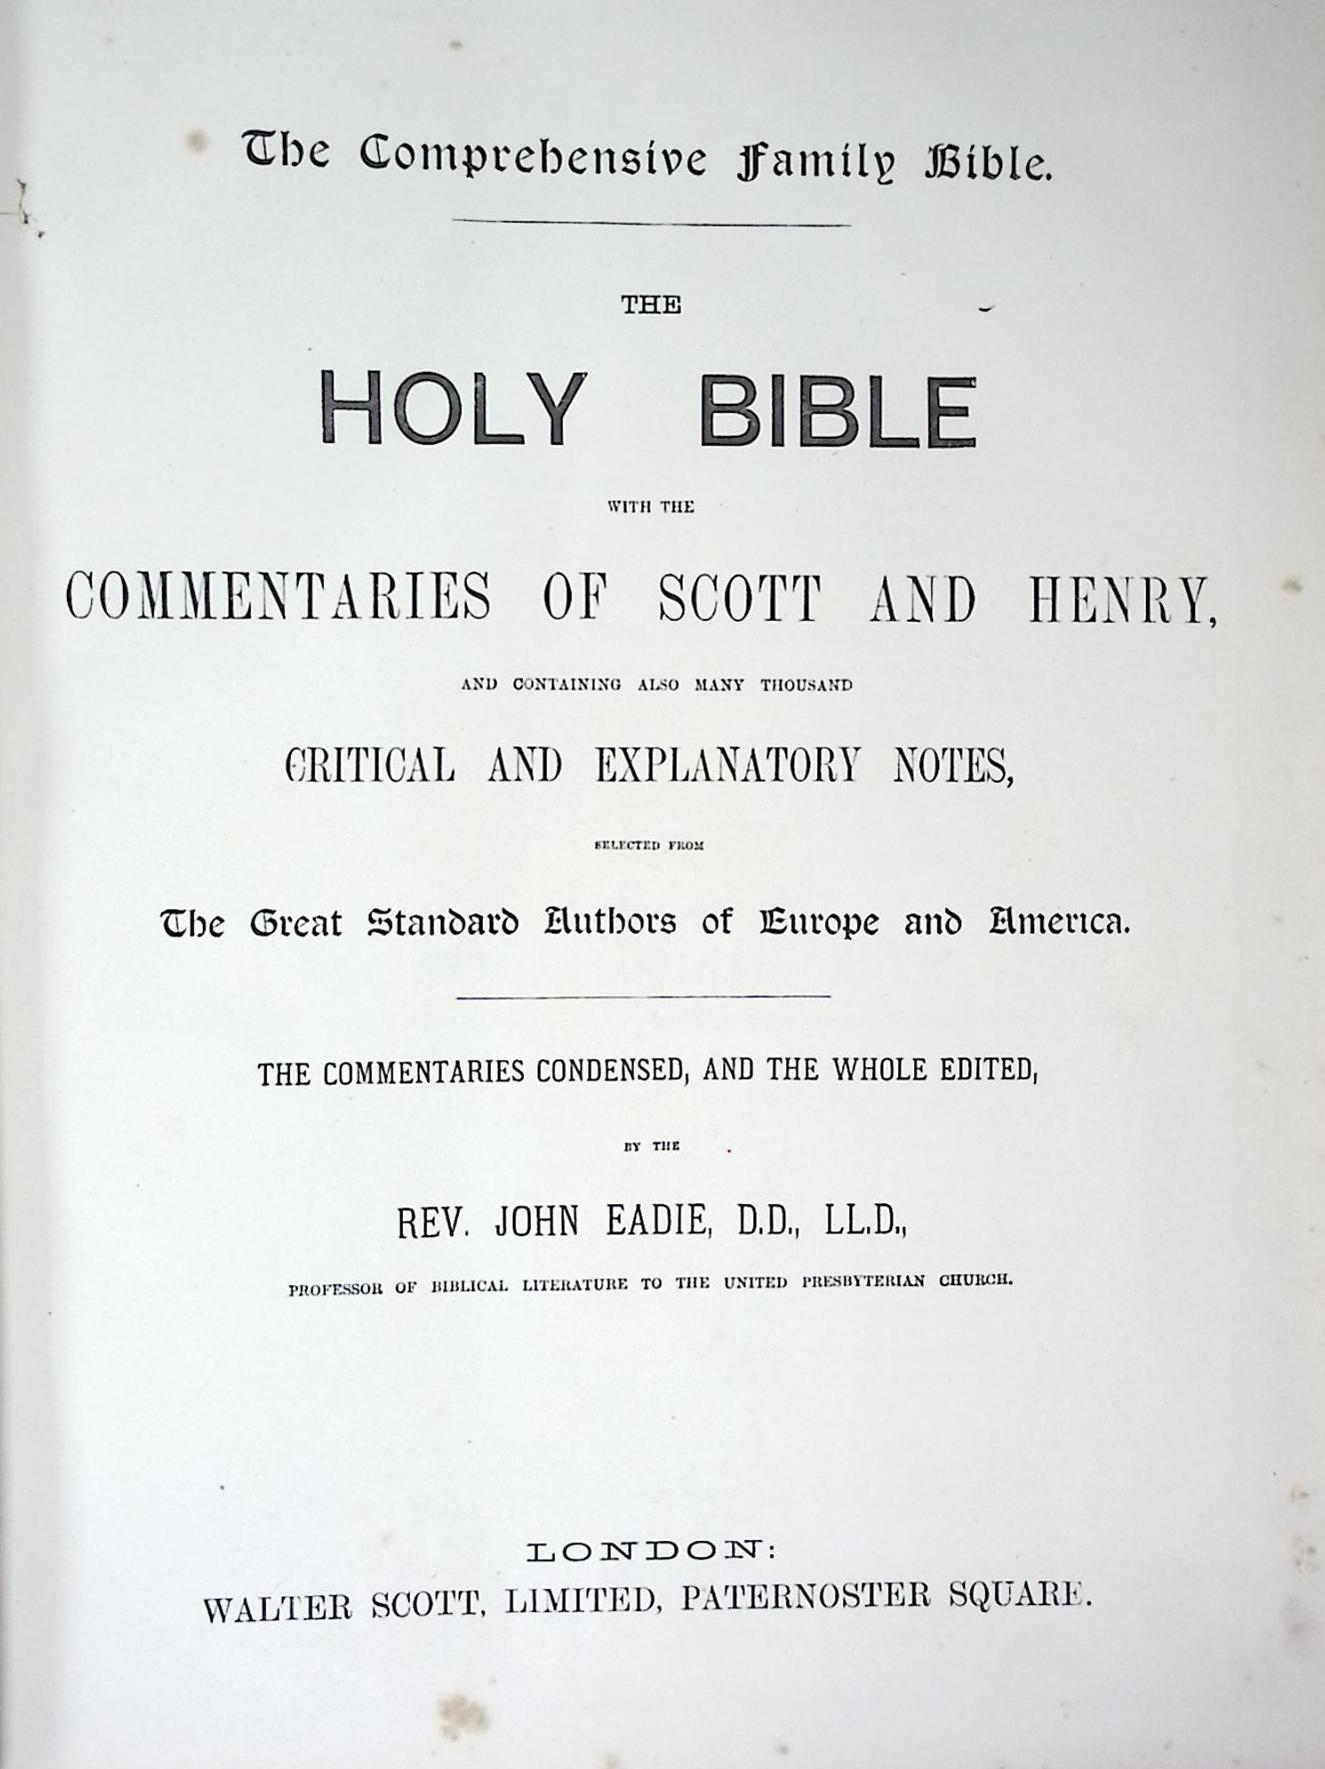 The Holy Bible with the Commentaries of Scott and Henry, and Containing also Many Thousand Critical and Explanatory Notes, ... With brass clasps. Scott edition.